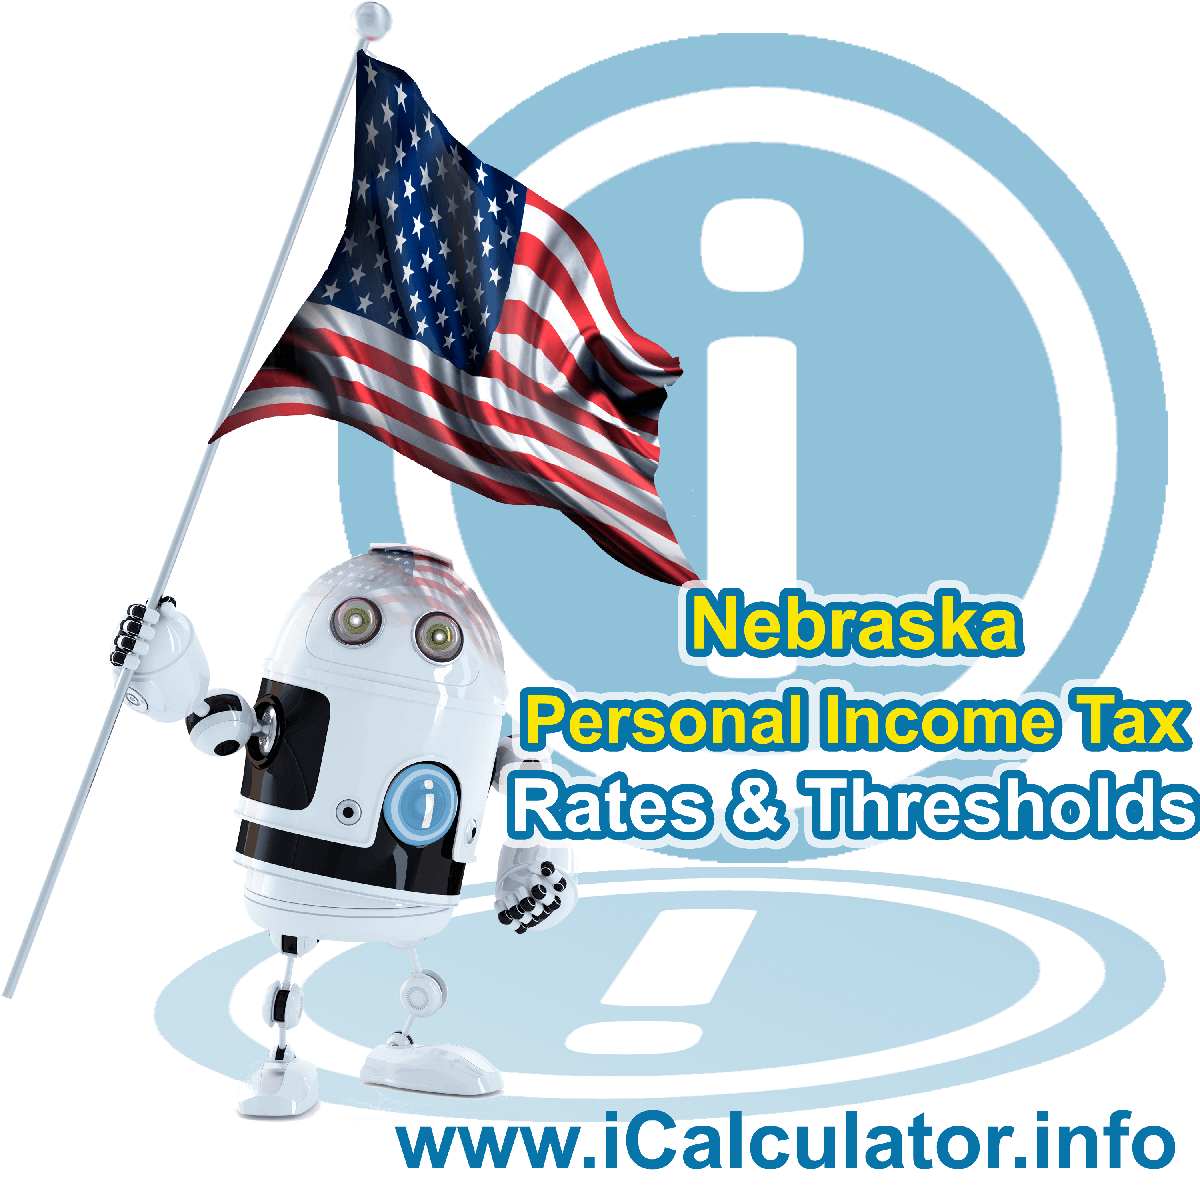 Nebraska State Tax Tables 2022. This image displays details of the Nebraska State Tax Tables for the 2022 tax return year which is provided in support of the 2022 US Tax Calculator